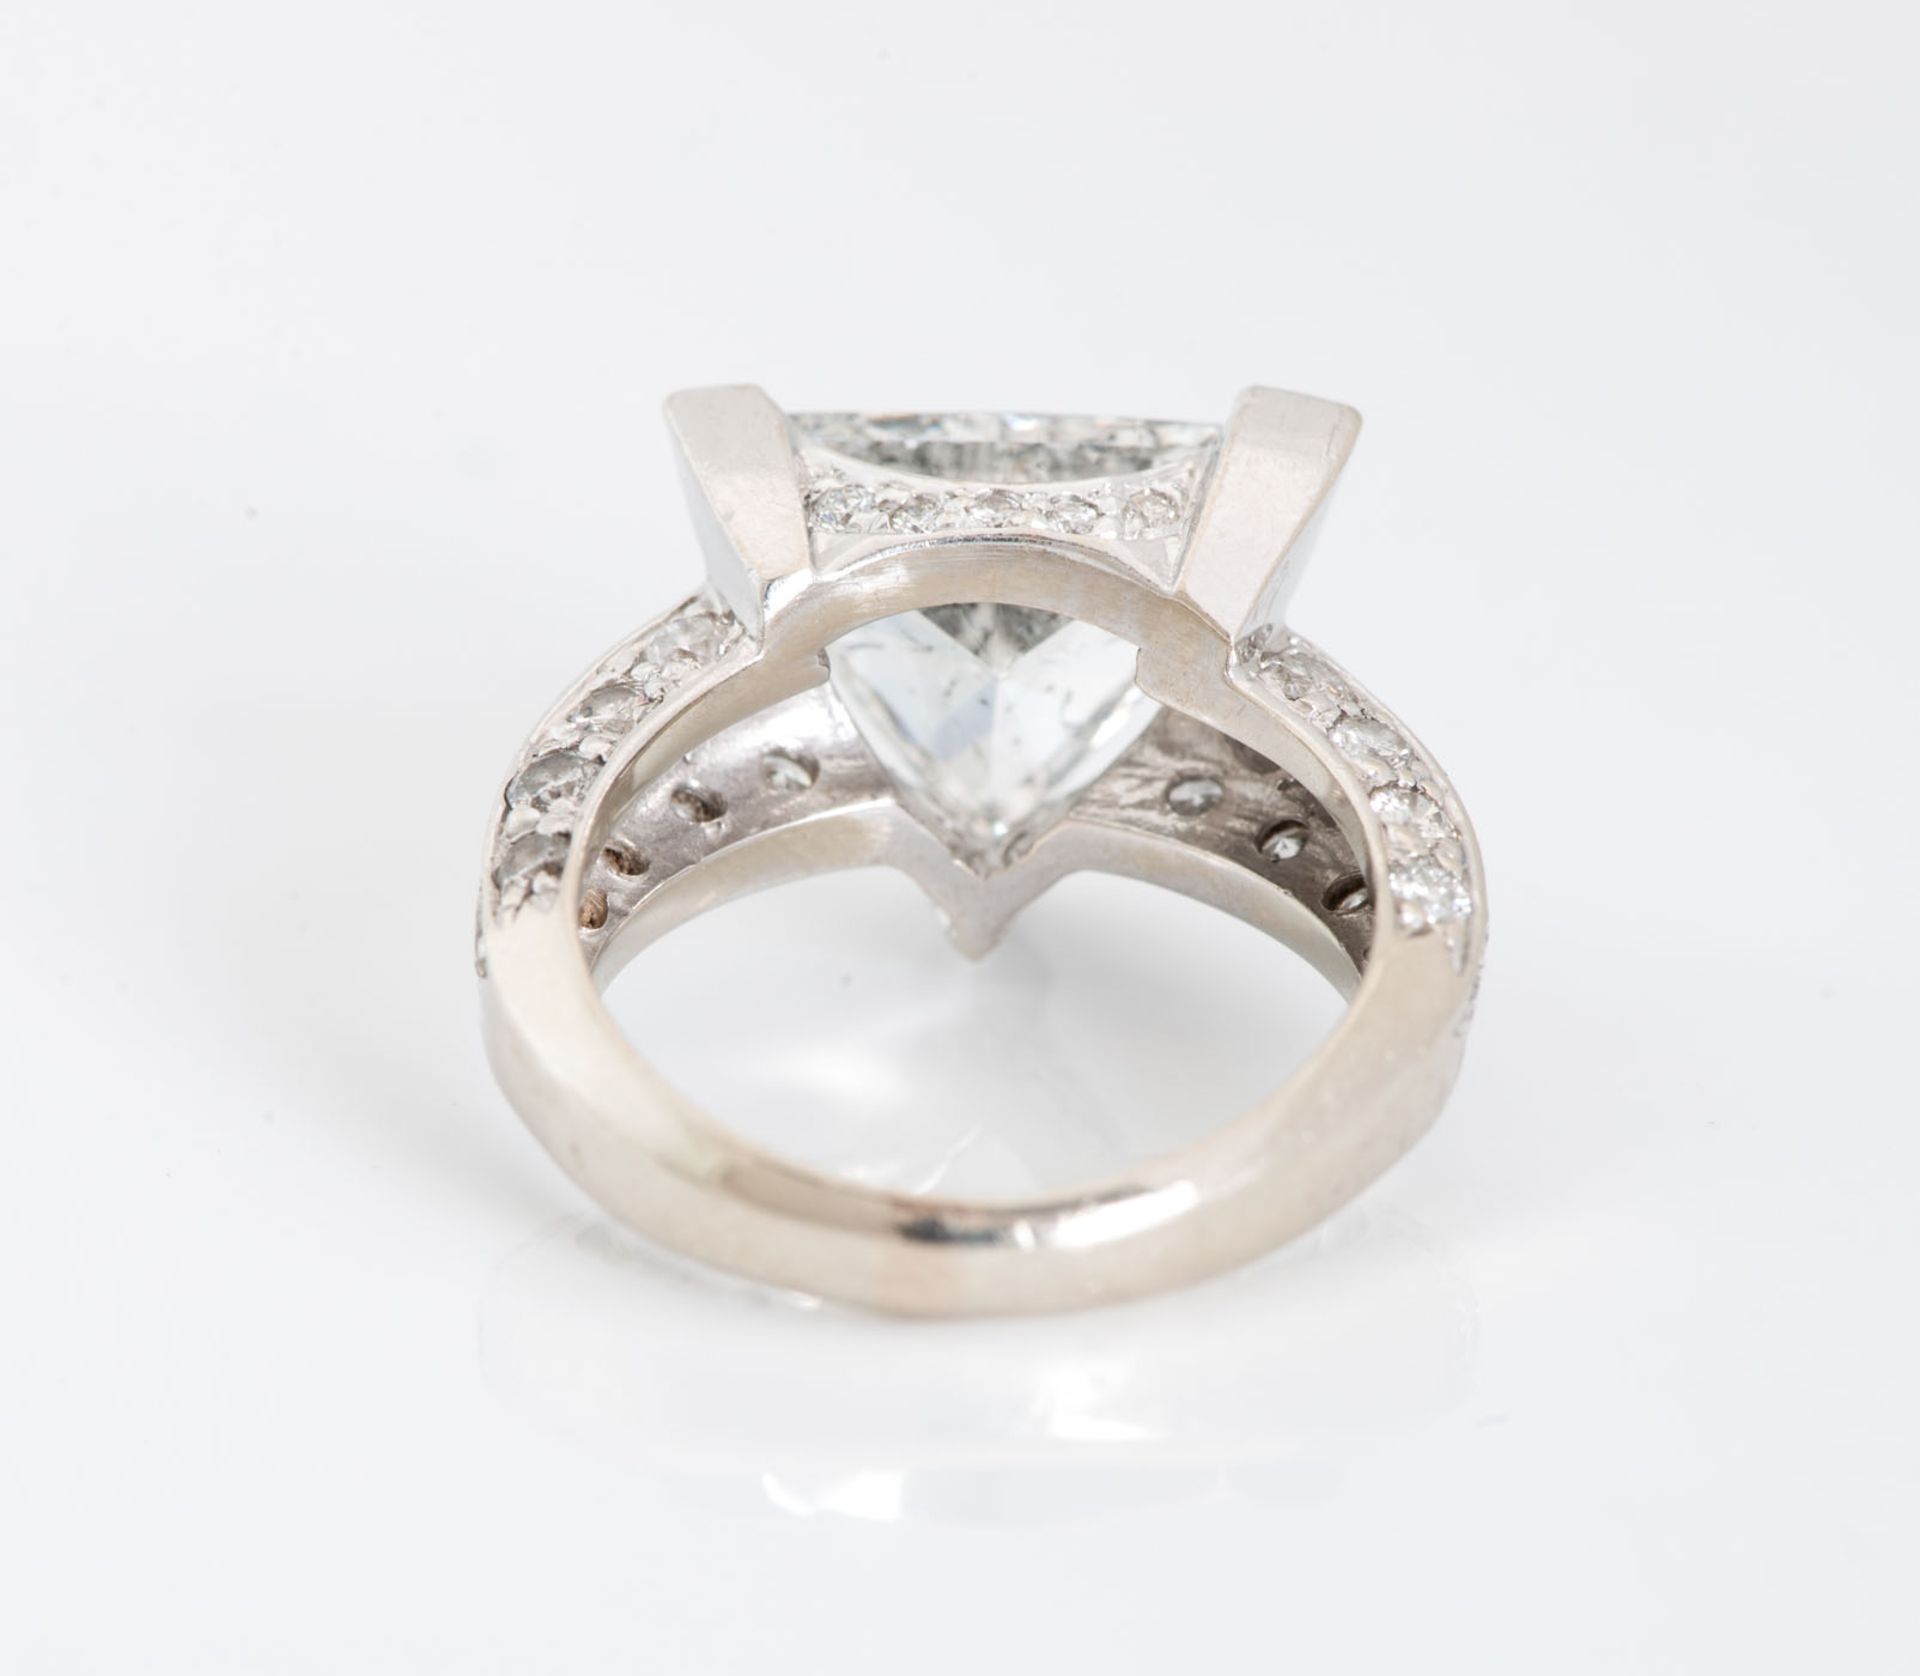 A 5.03Ct Trillion Cut Diamond and 14K White Gold Engagement Ring - Image 4 of 4